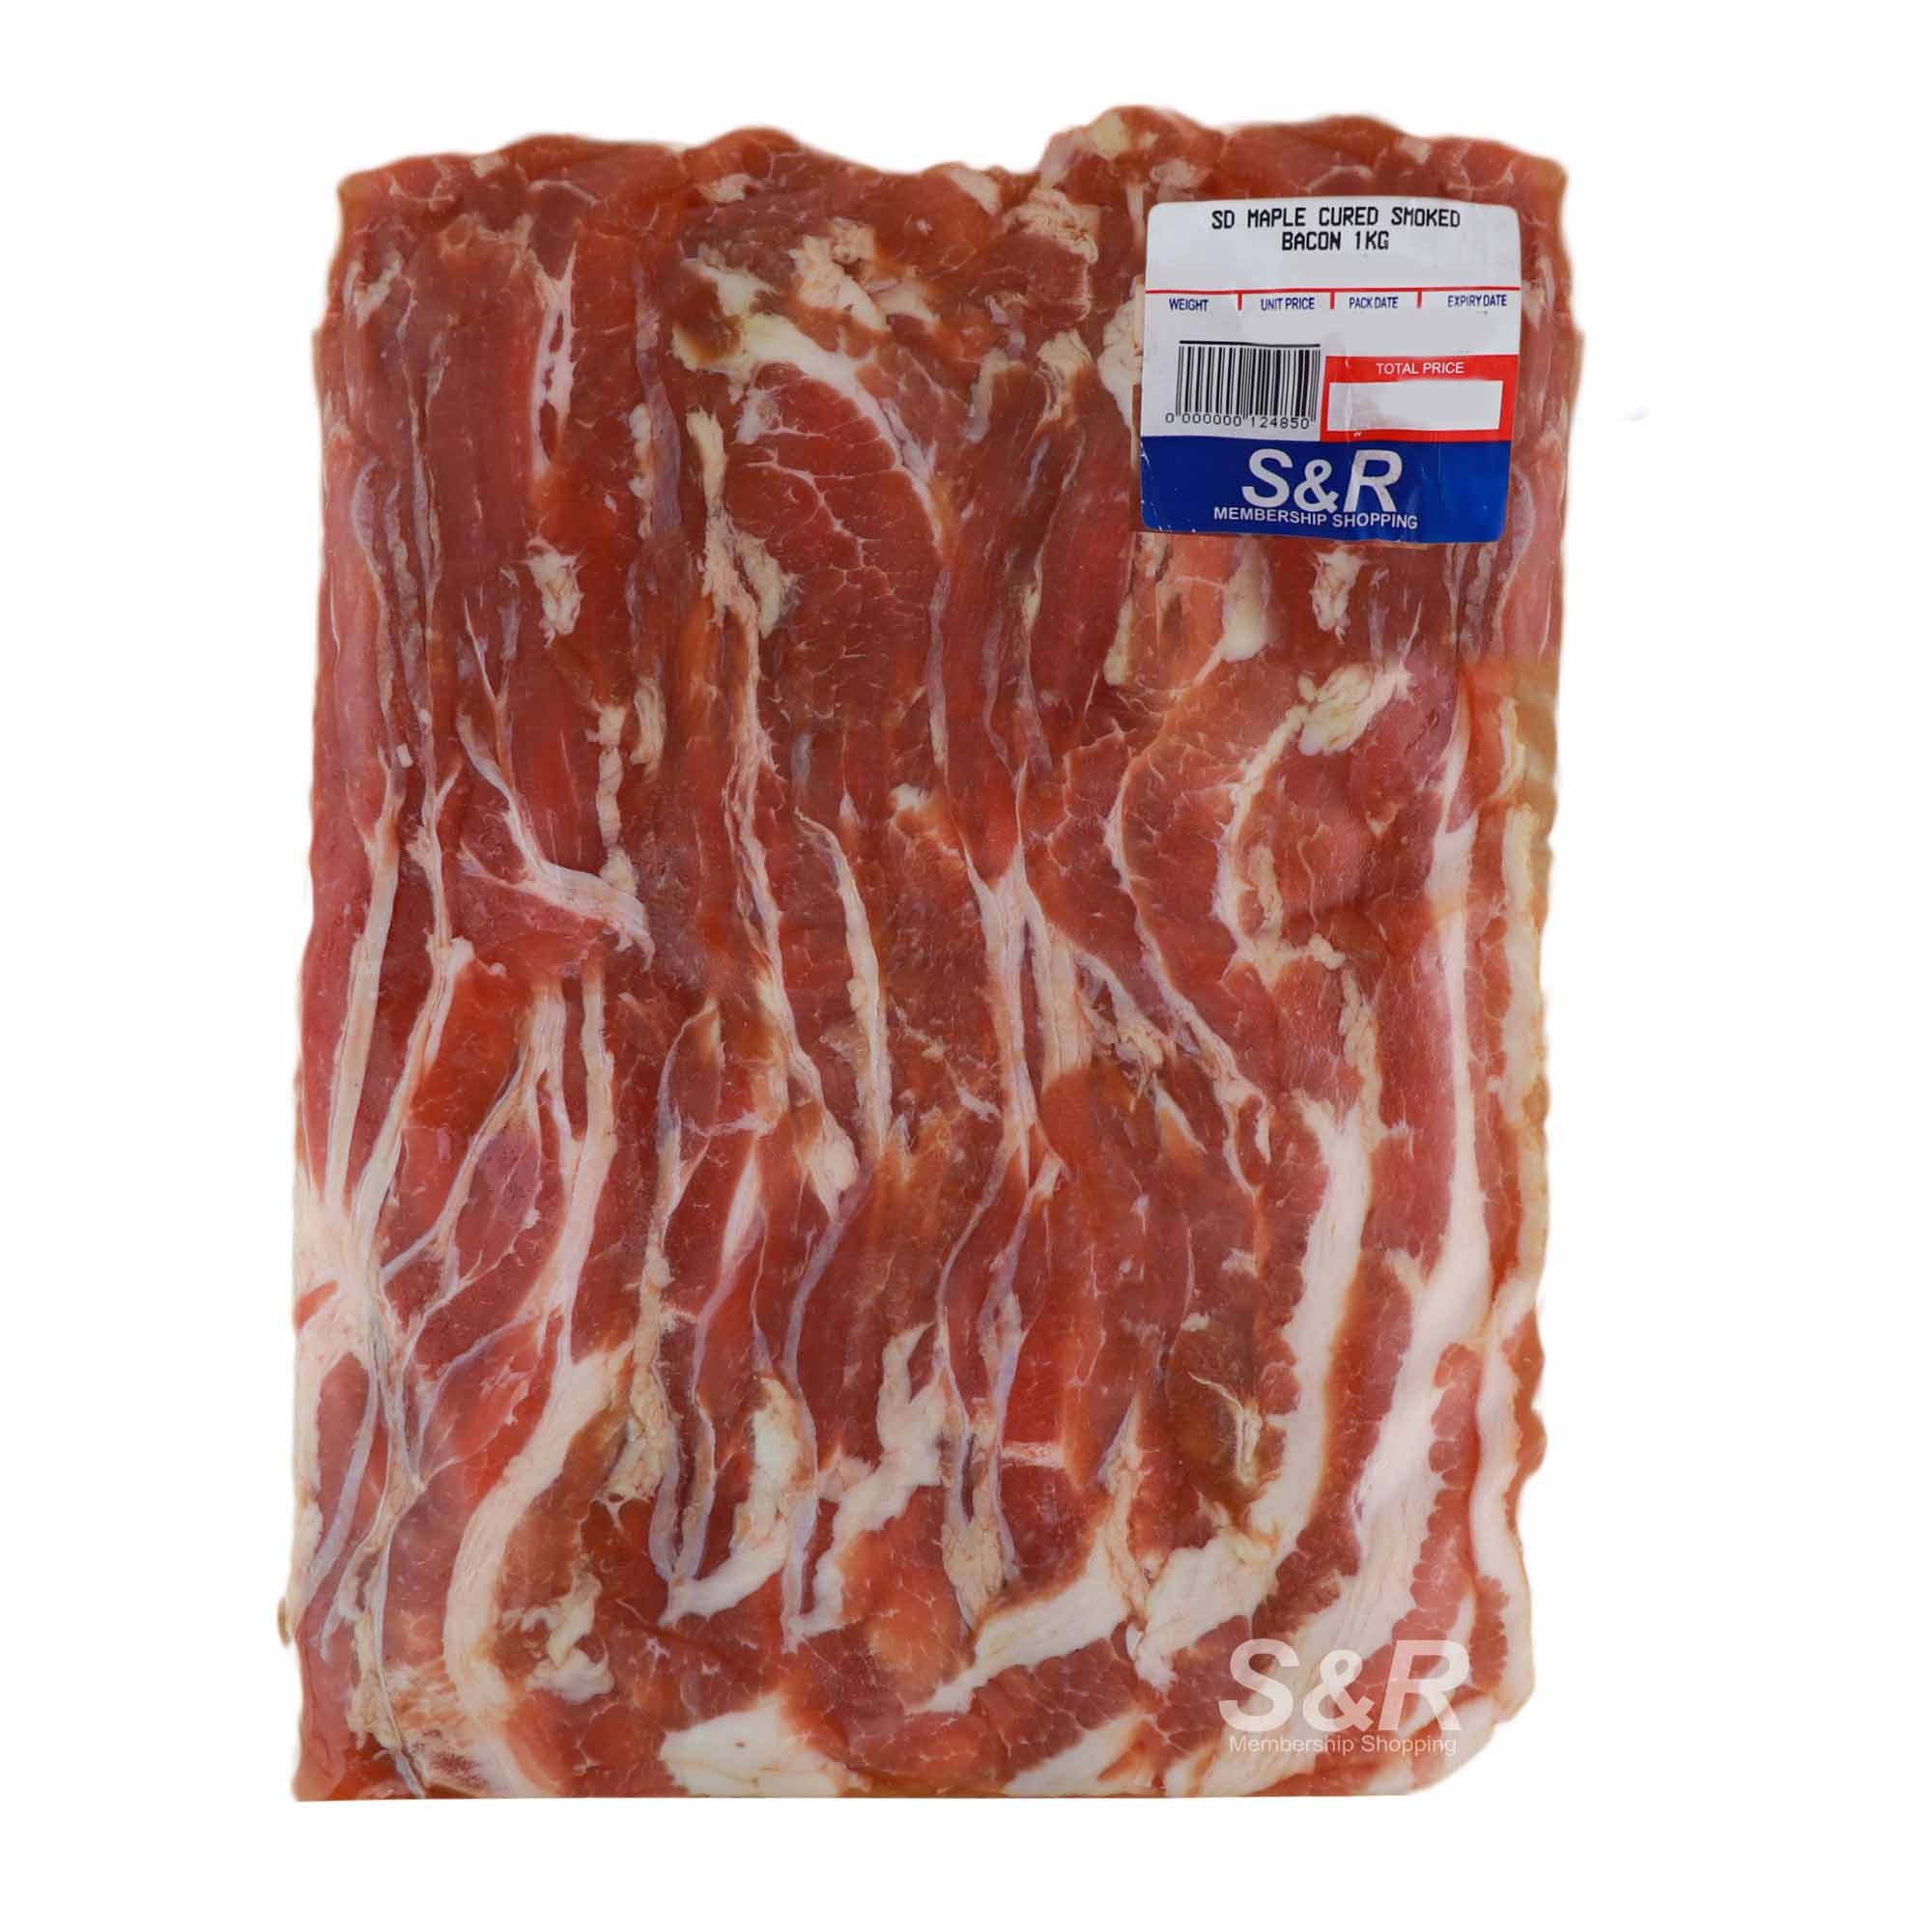 S&R Maple Cured Smoked Bacon 1kg